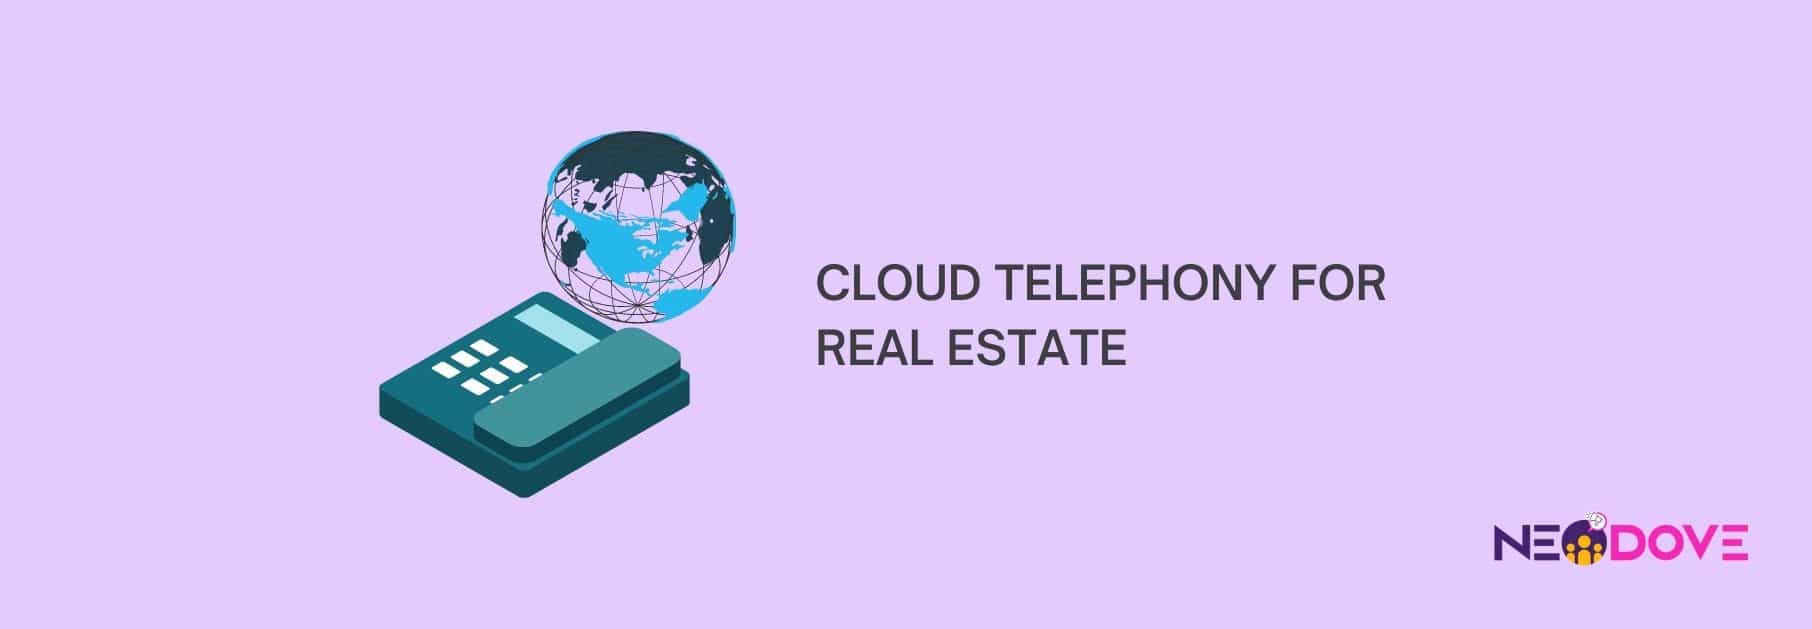 How Real Estate Can Leverage Cloud Telephony?